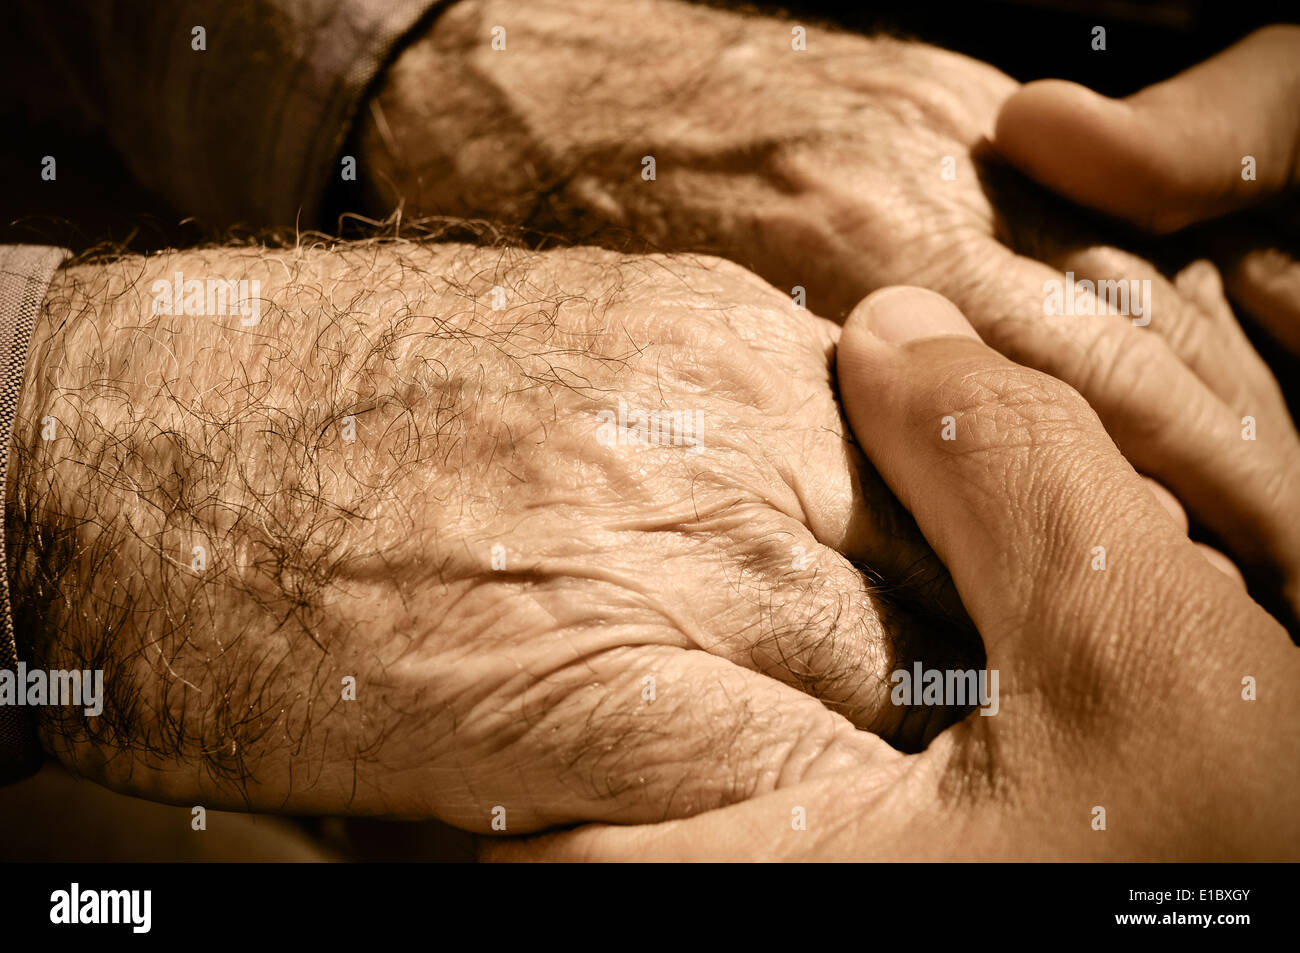 young man holding the hands of an old man Stock Photo